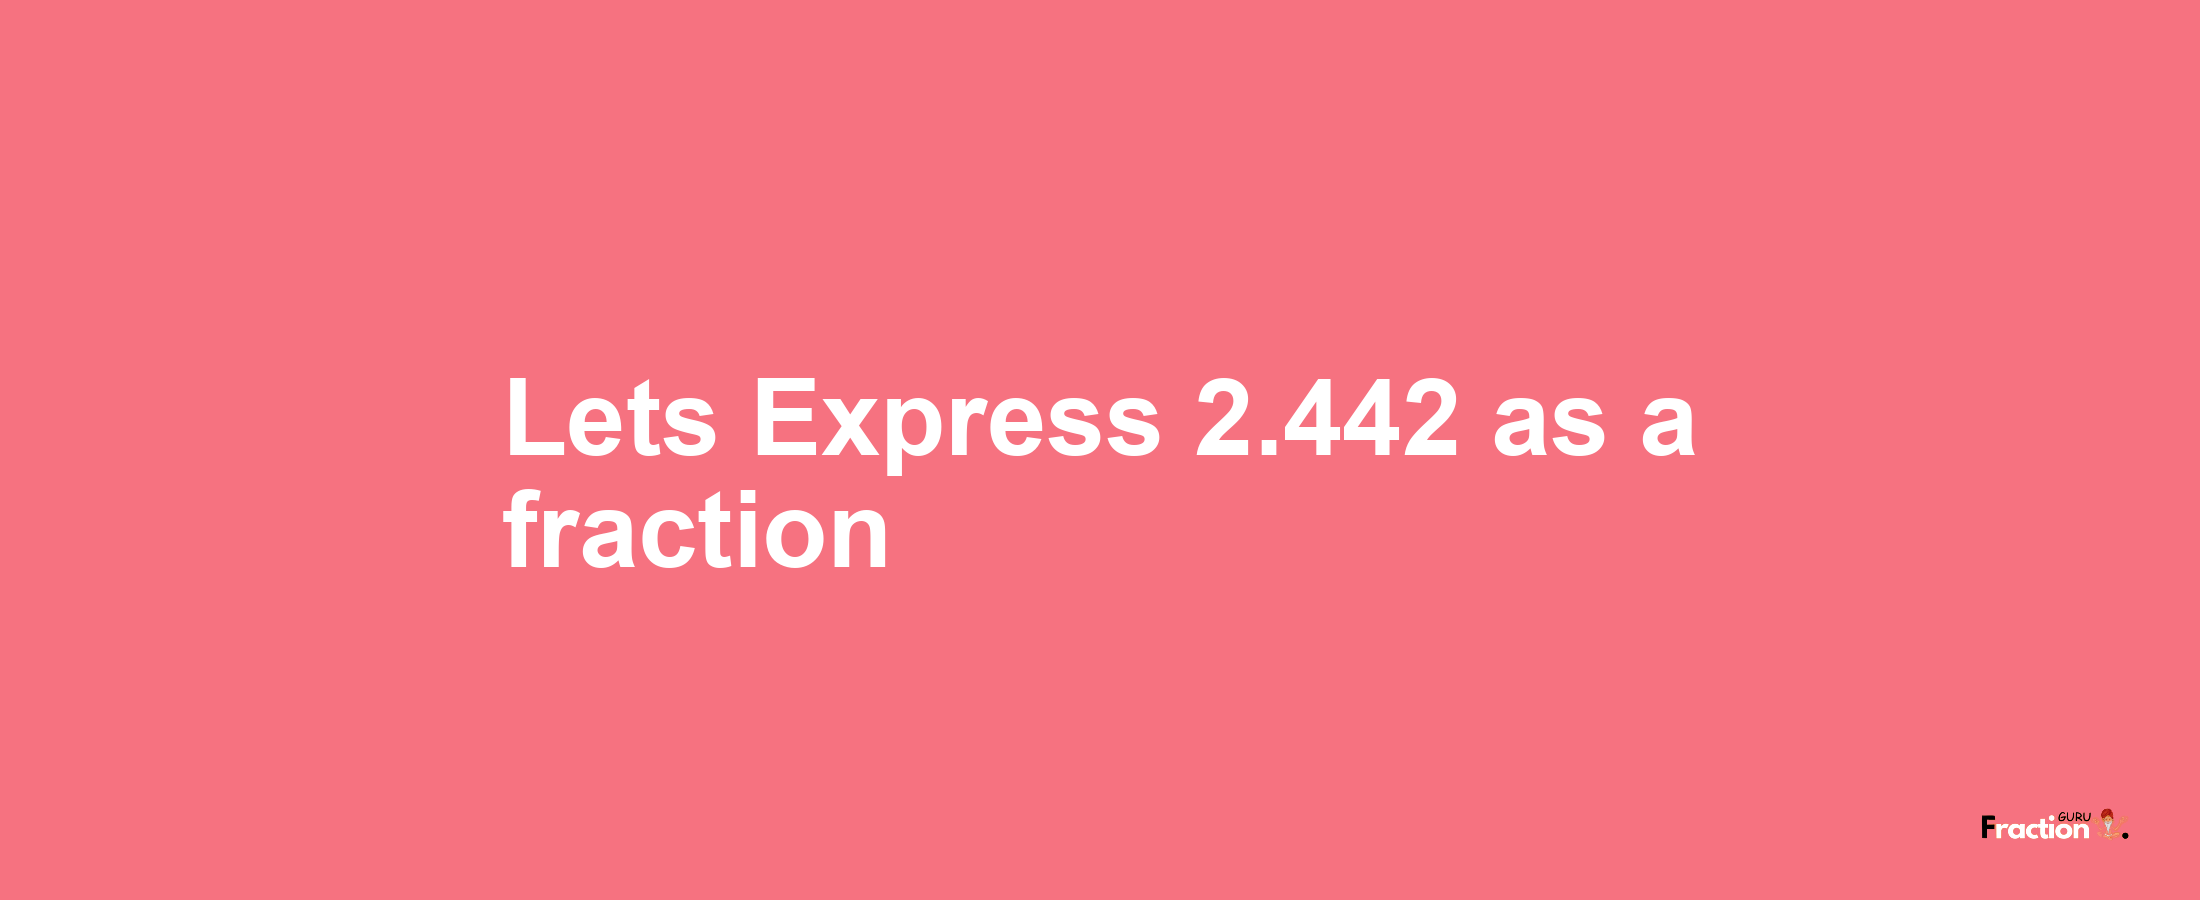 Lets Express 2.442 as afraction